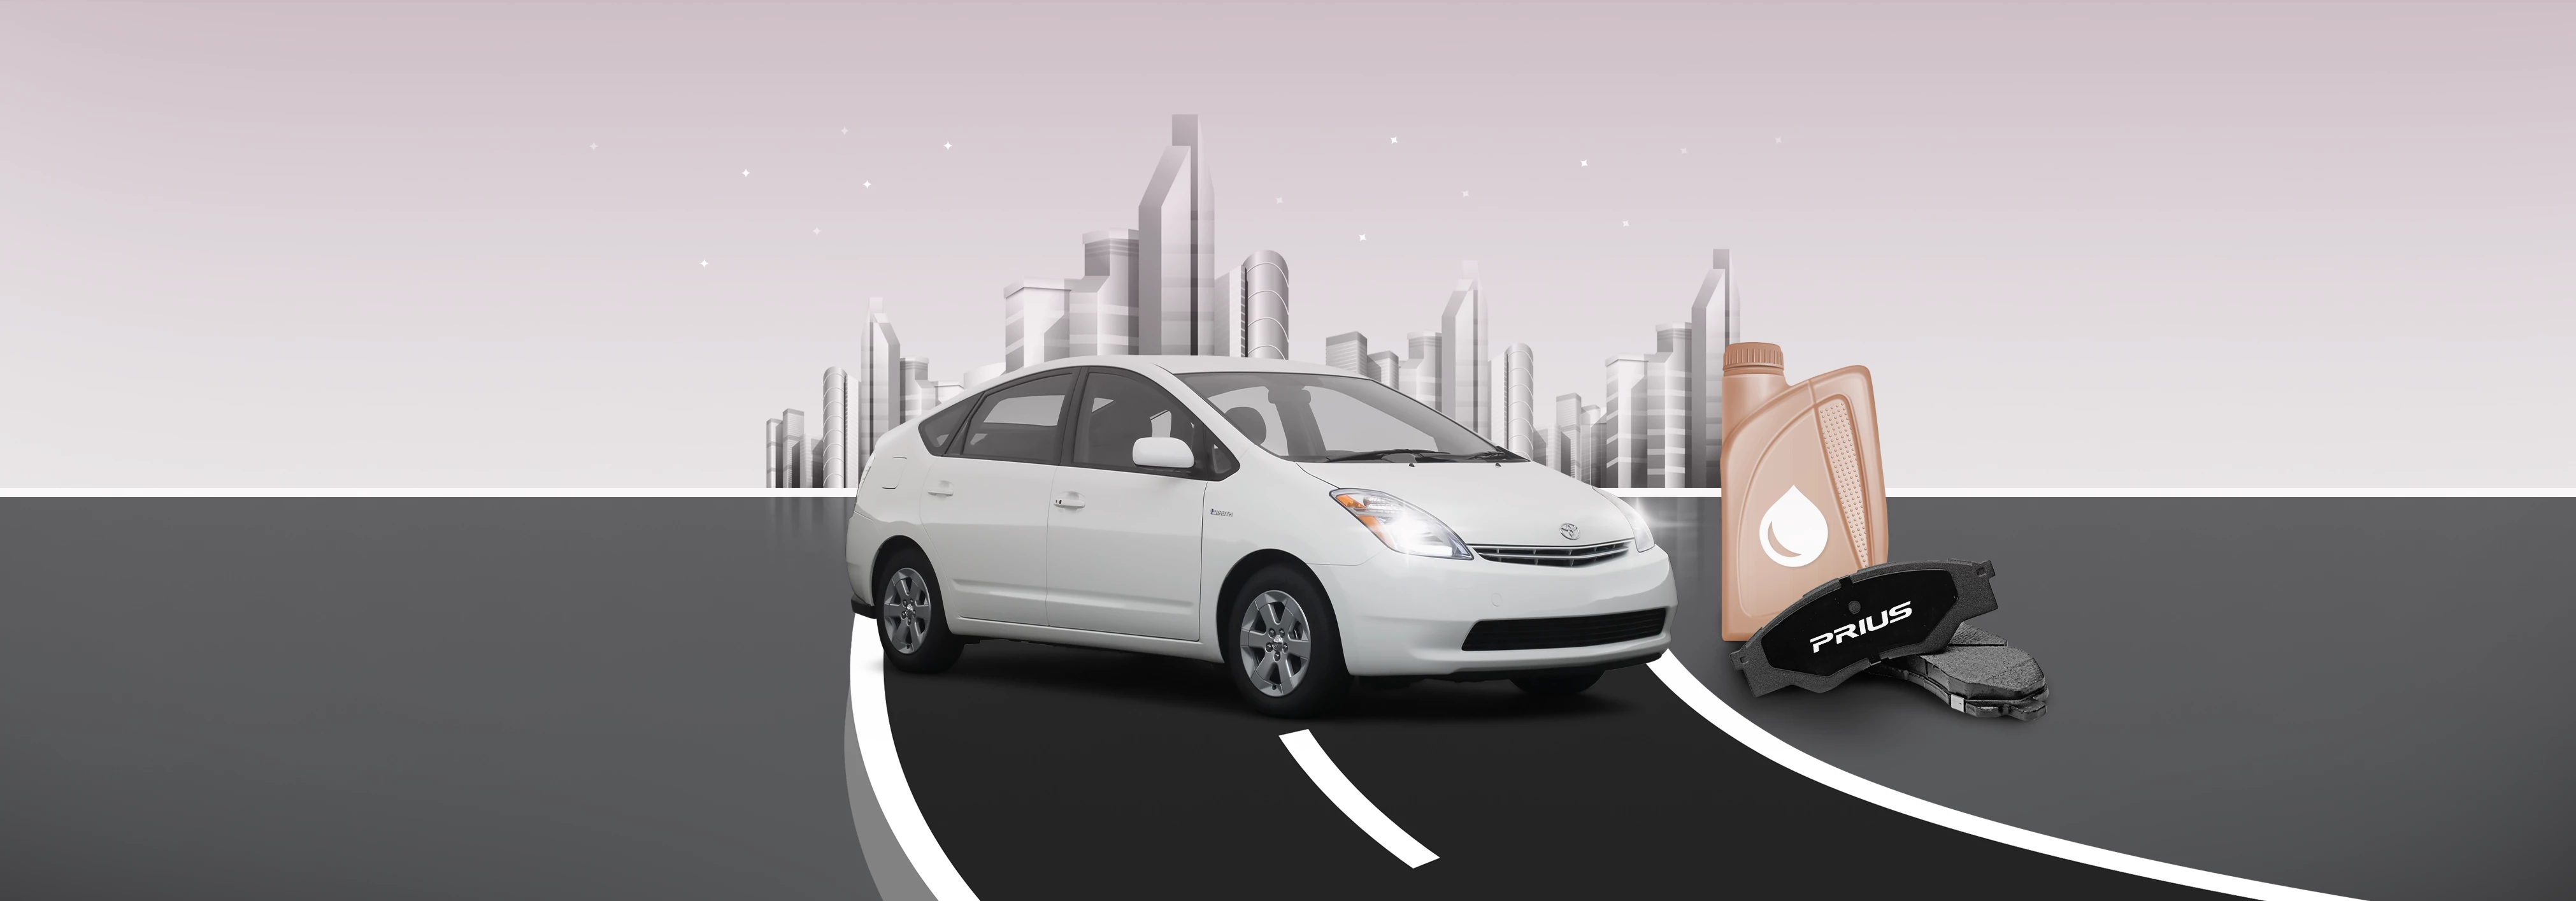 Offer Cover Image For Generation II Prius